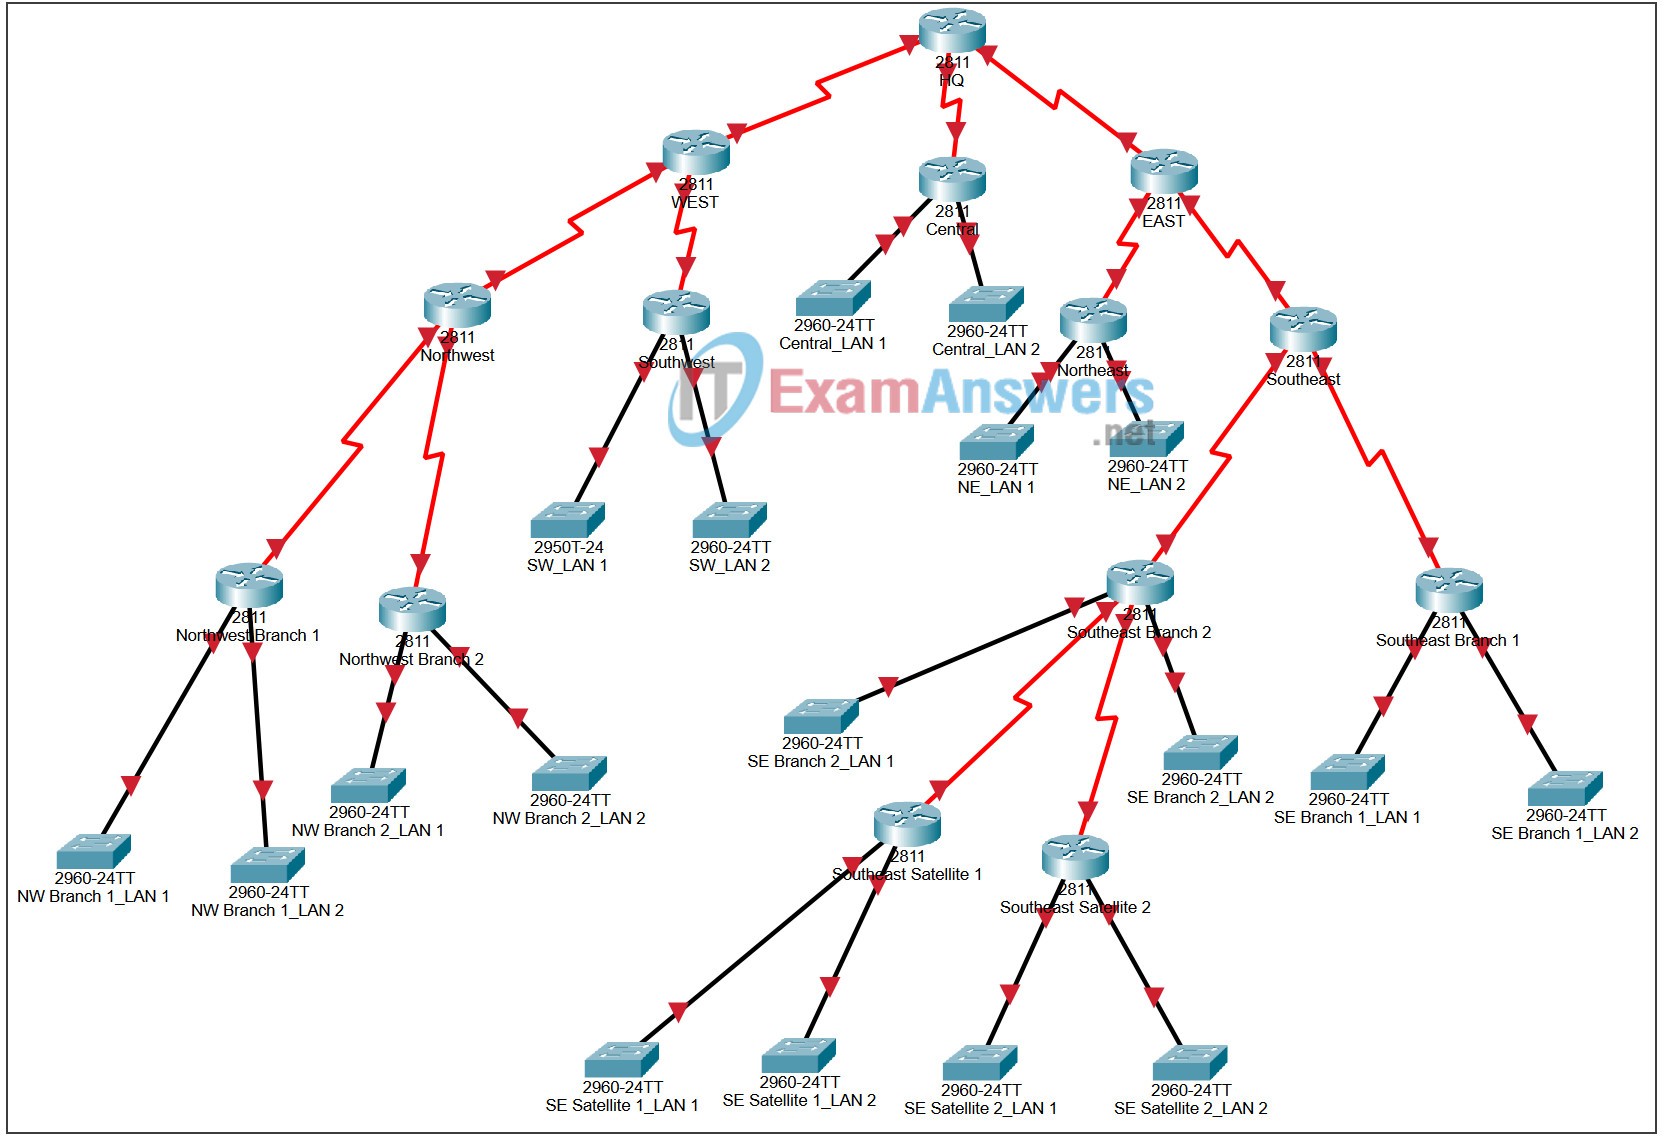 6.4.5 Packet Tracer - Challenge Route Summarization Answers 2